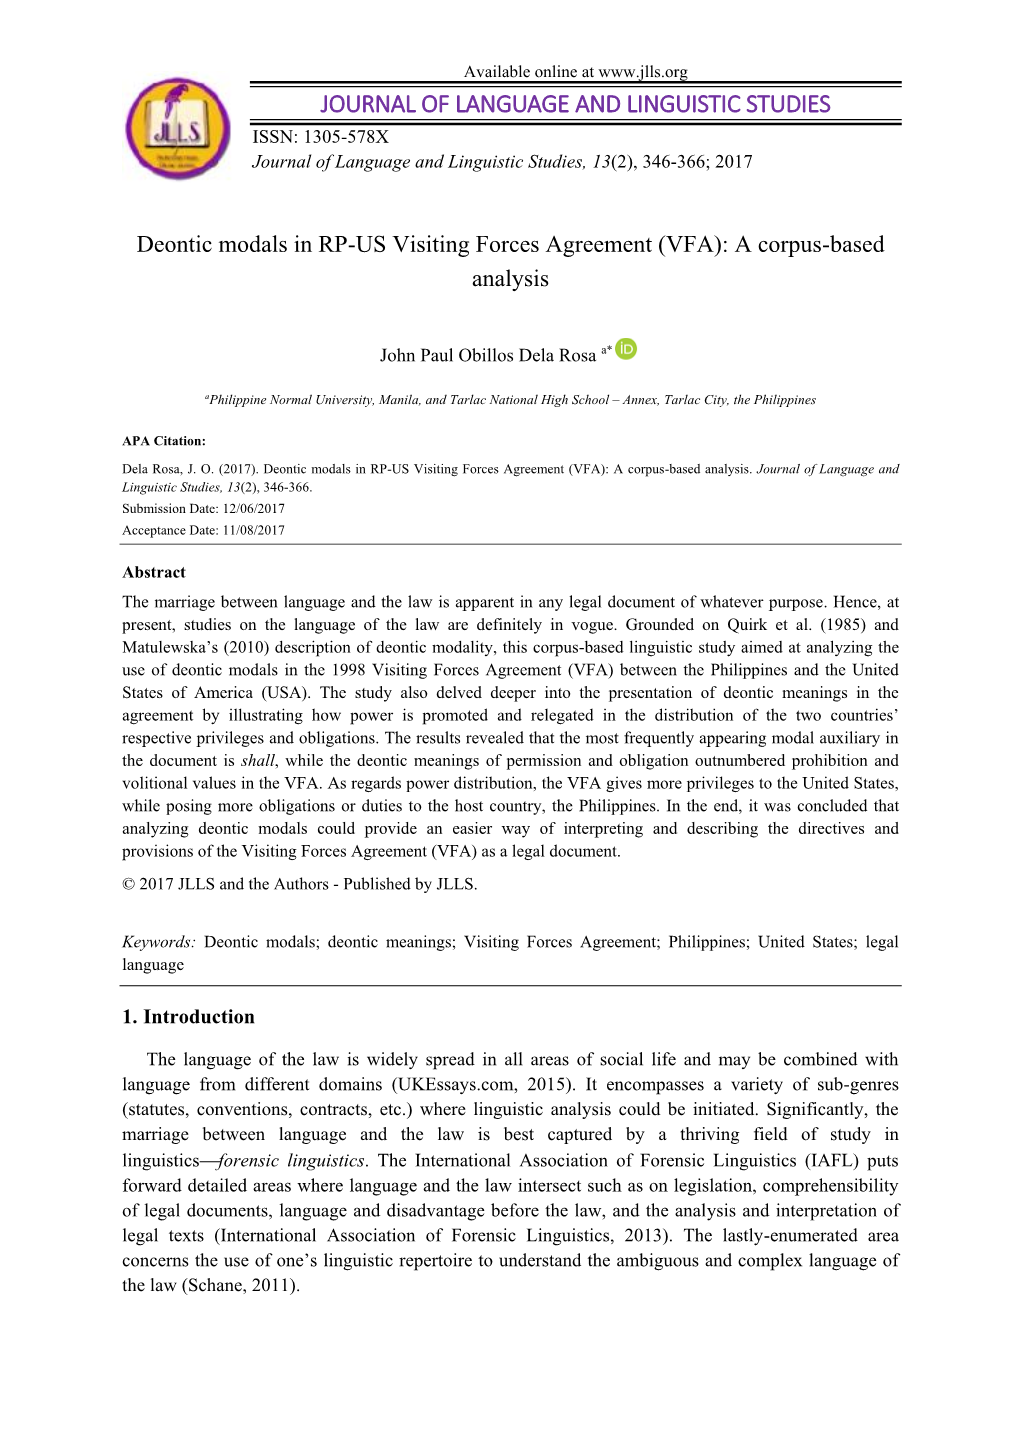 Deontic Modals in RP-US Visiting Forces Agreement (VFA): a Corpus-Based Analysis